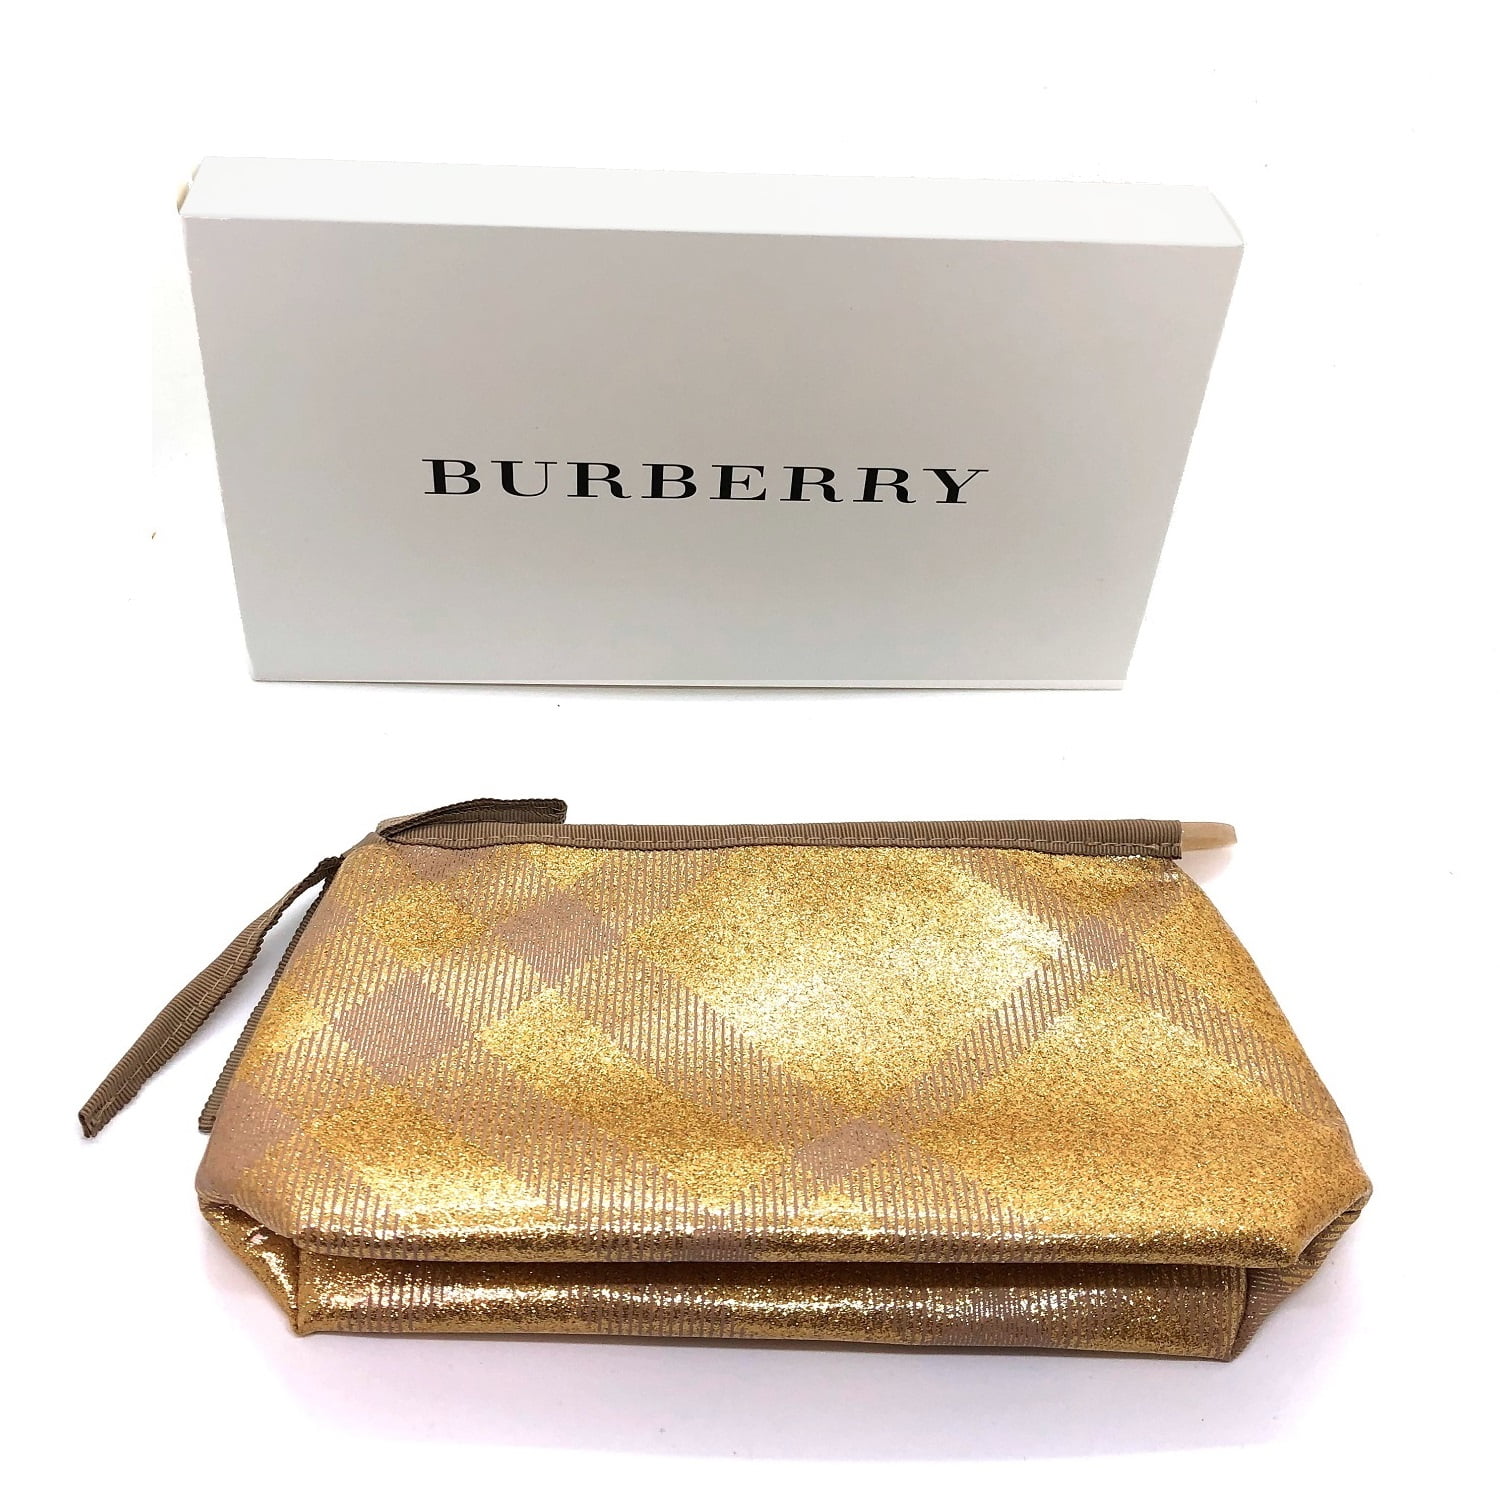 Burberry Large Metallic Gold Travel Toiletry Makeup Bag Pouch with Gift Box  